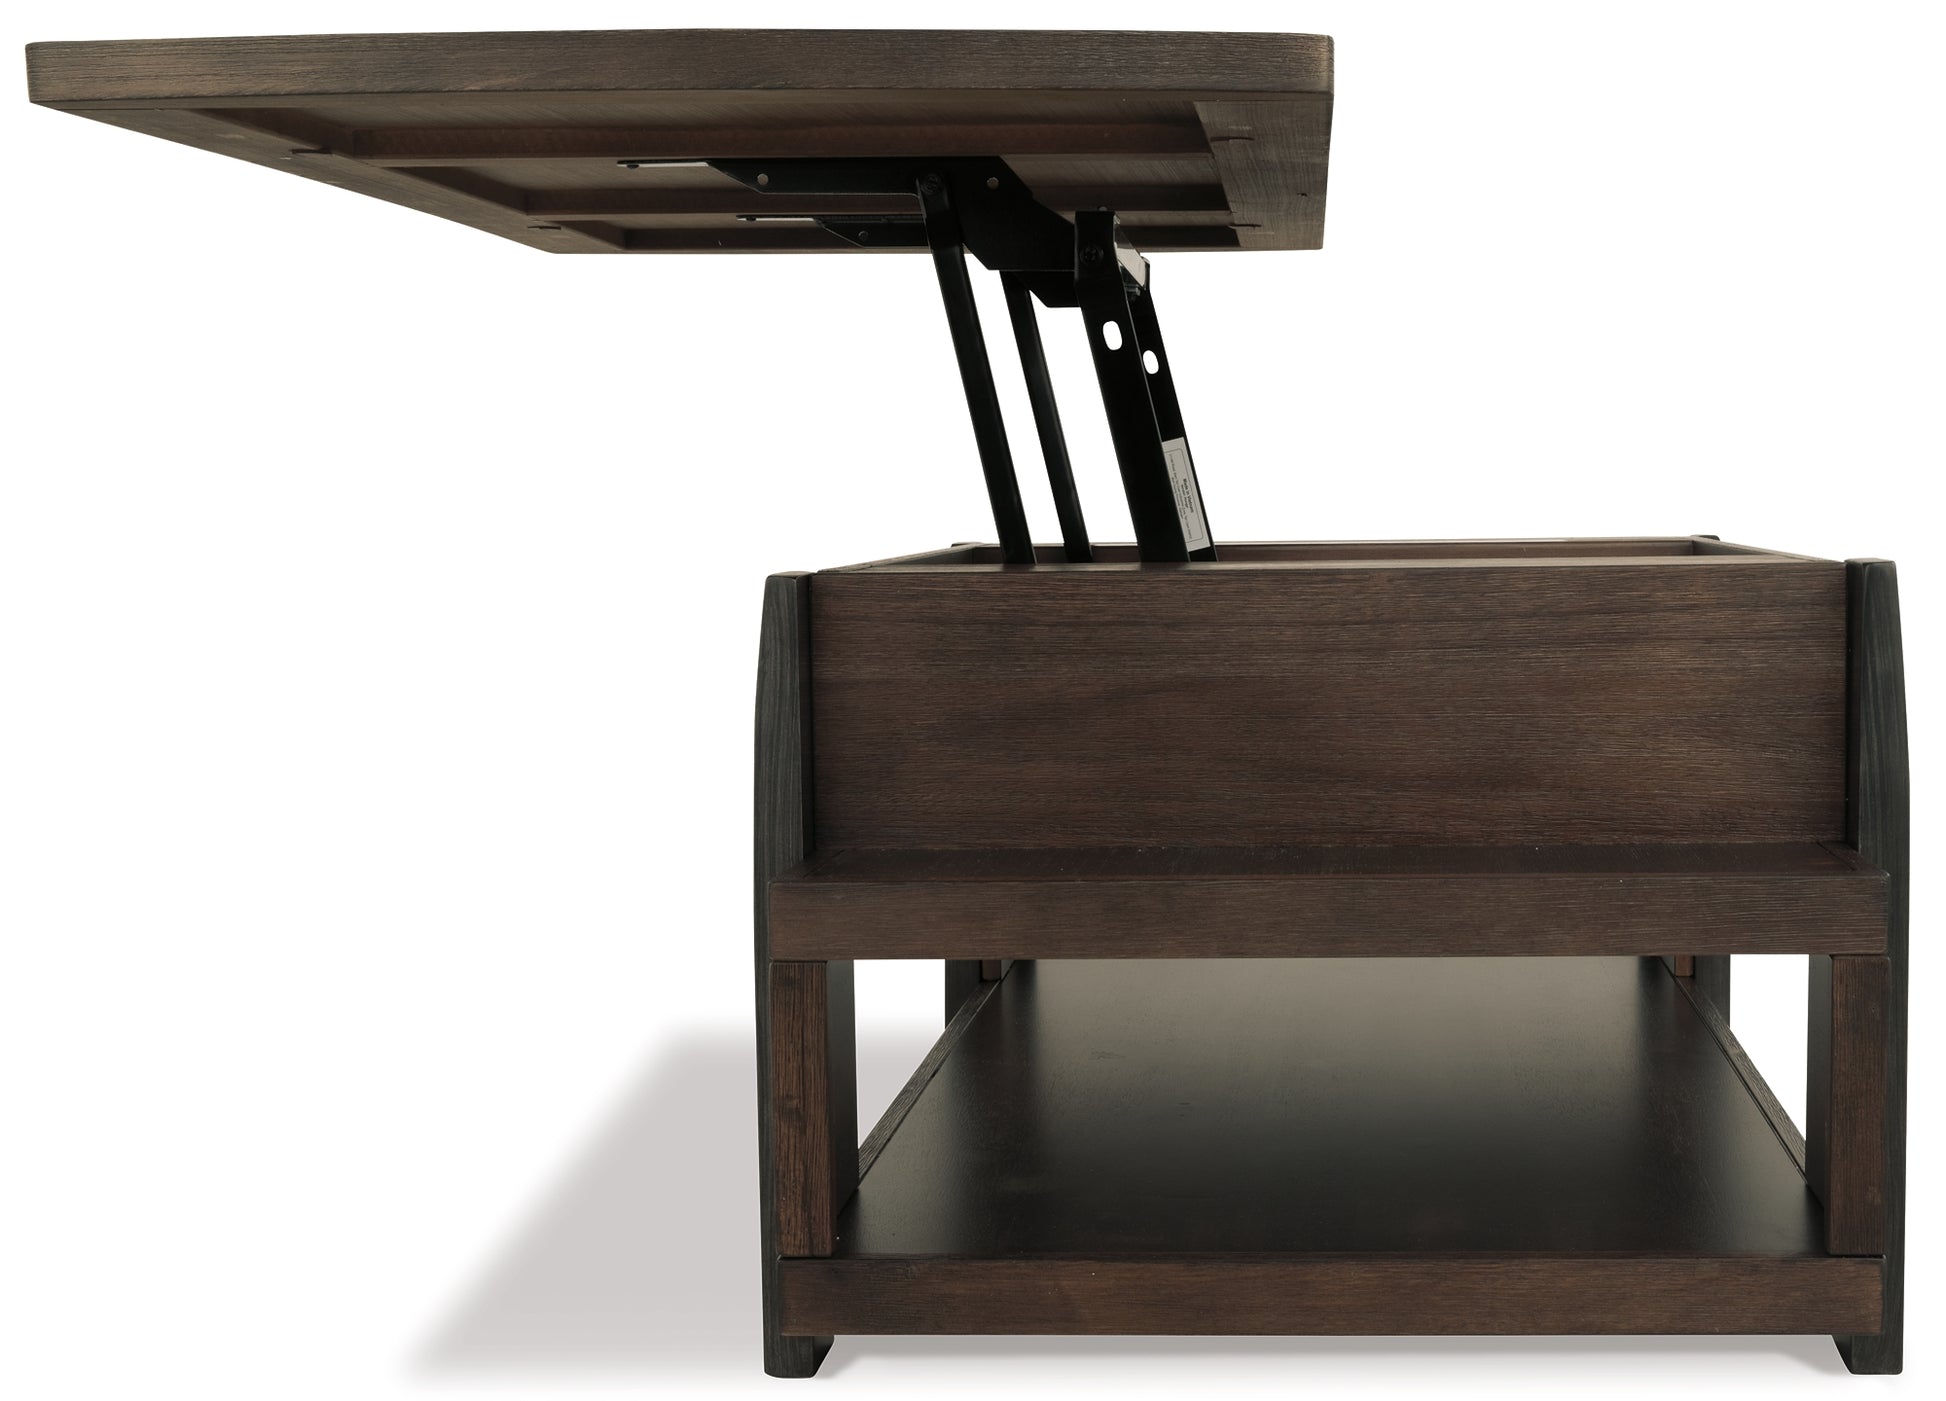 Vailbry Lift Top Cocktail Table JB's Furniture  Home Furniture, Home Decor, Furniture Store